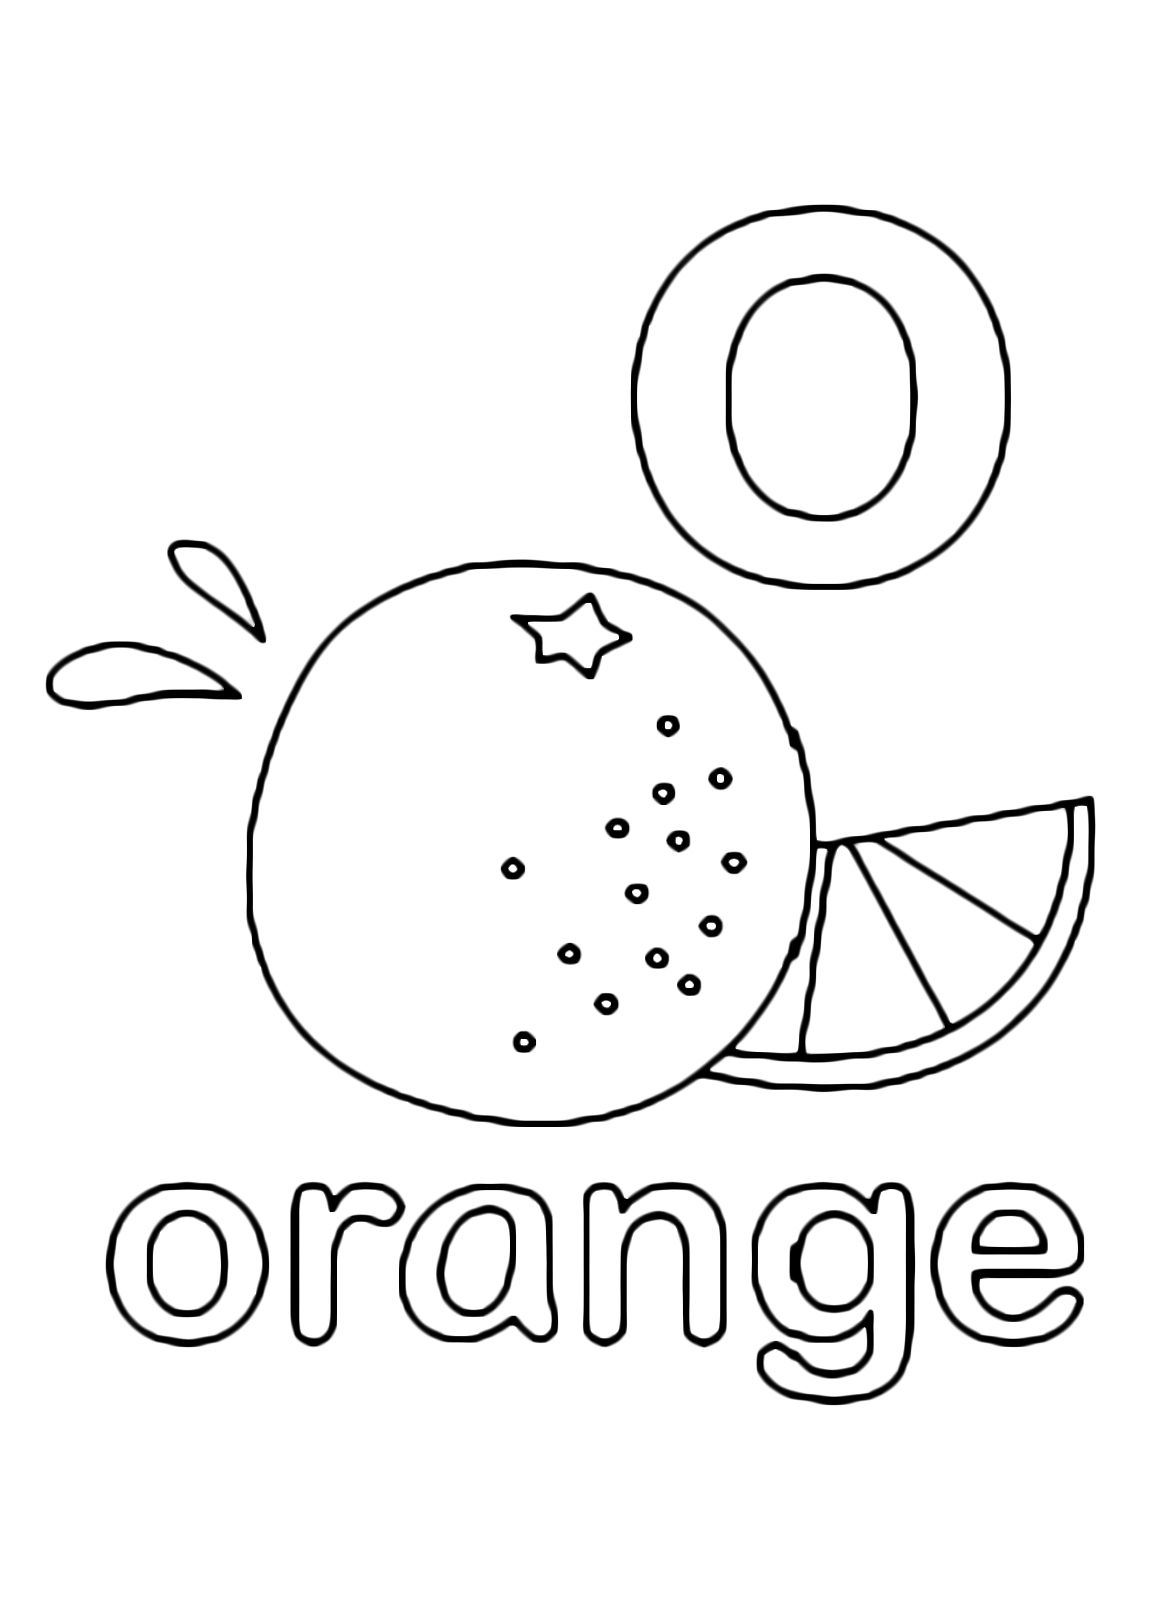 Letters and numbers - o for orange lowercase letter